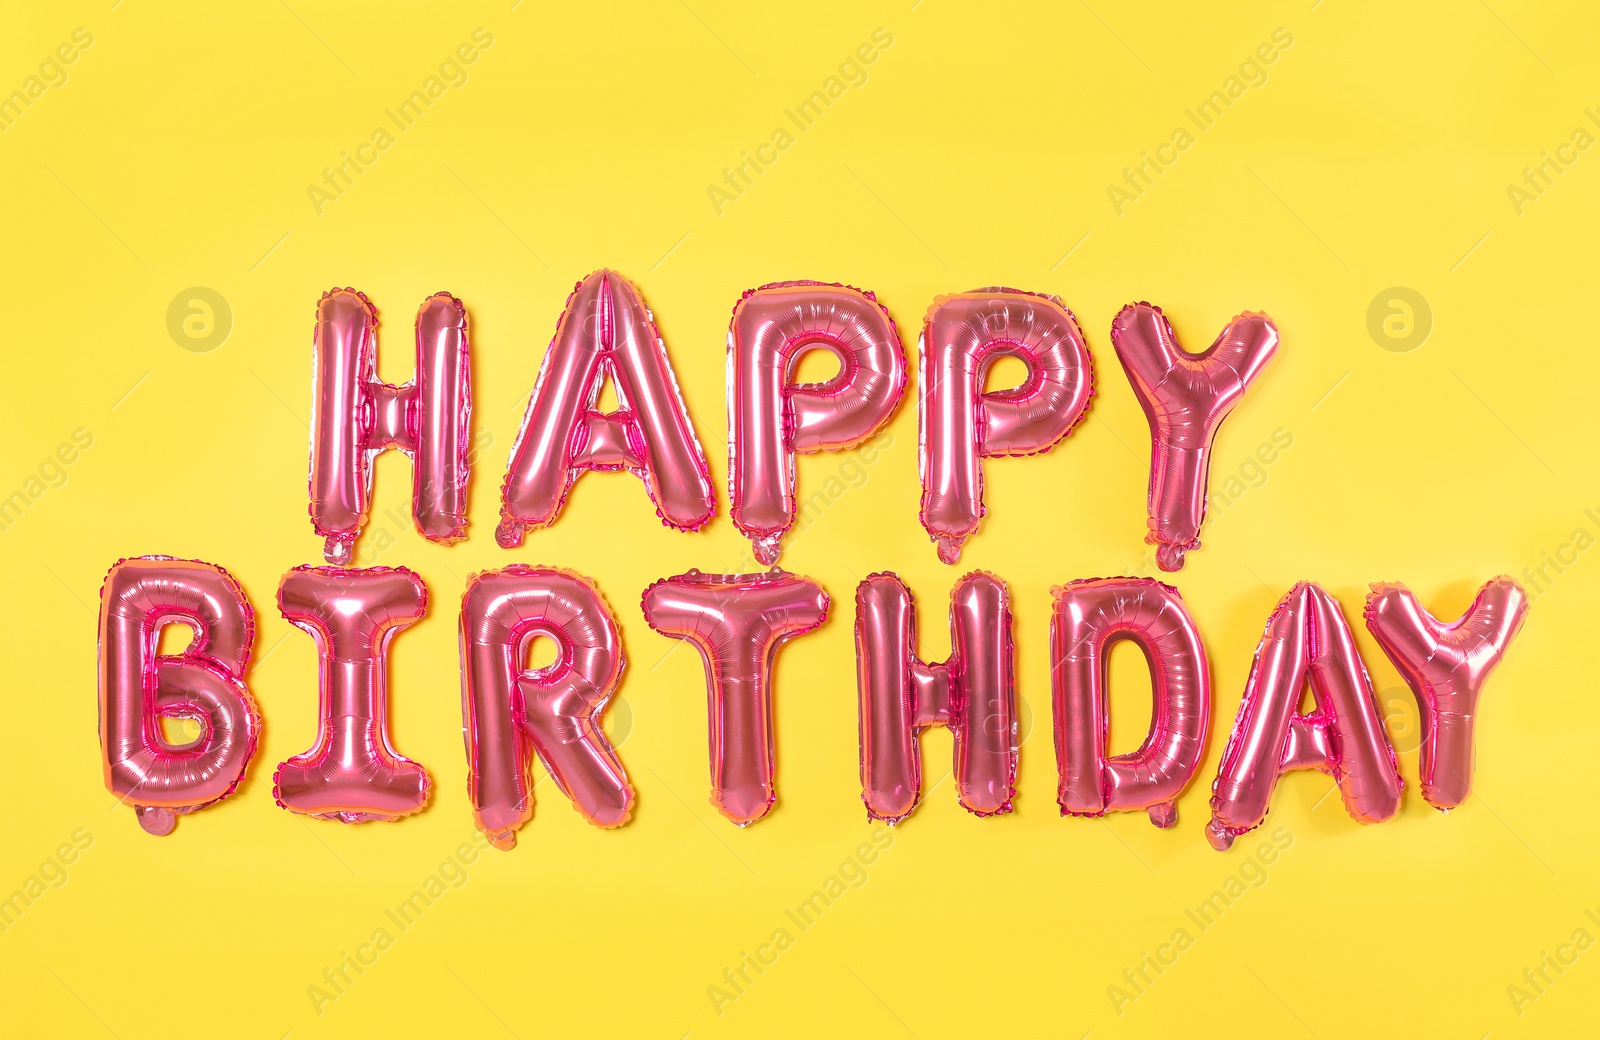 Photo of Phrase HAPPY BIRTHDAY made of pink foil balloon letters on yellow background